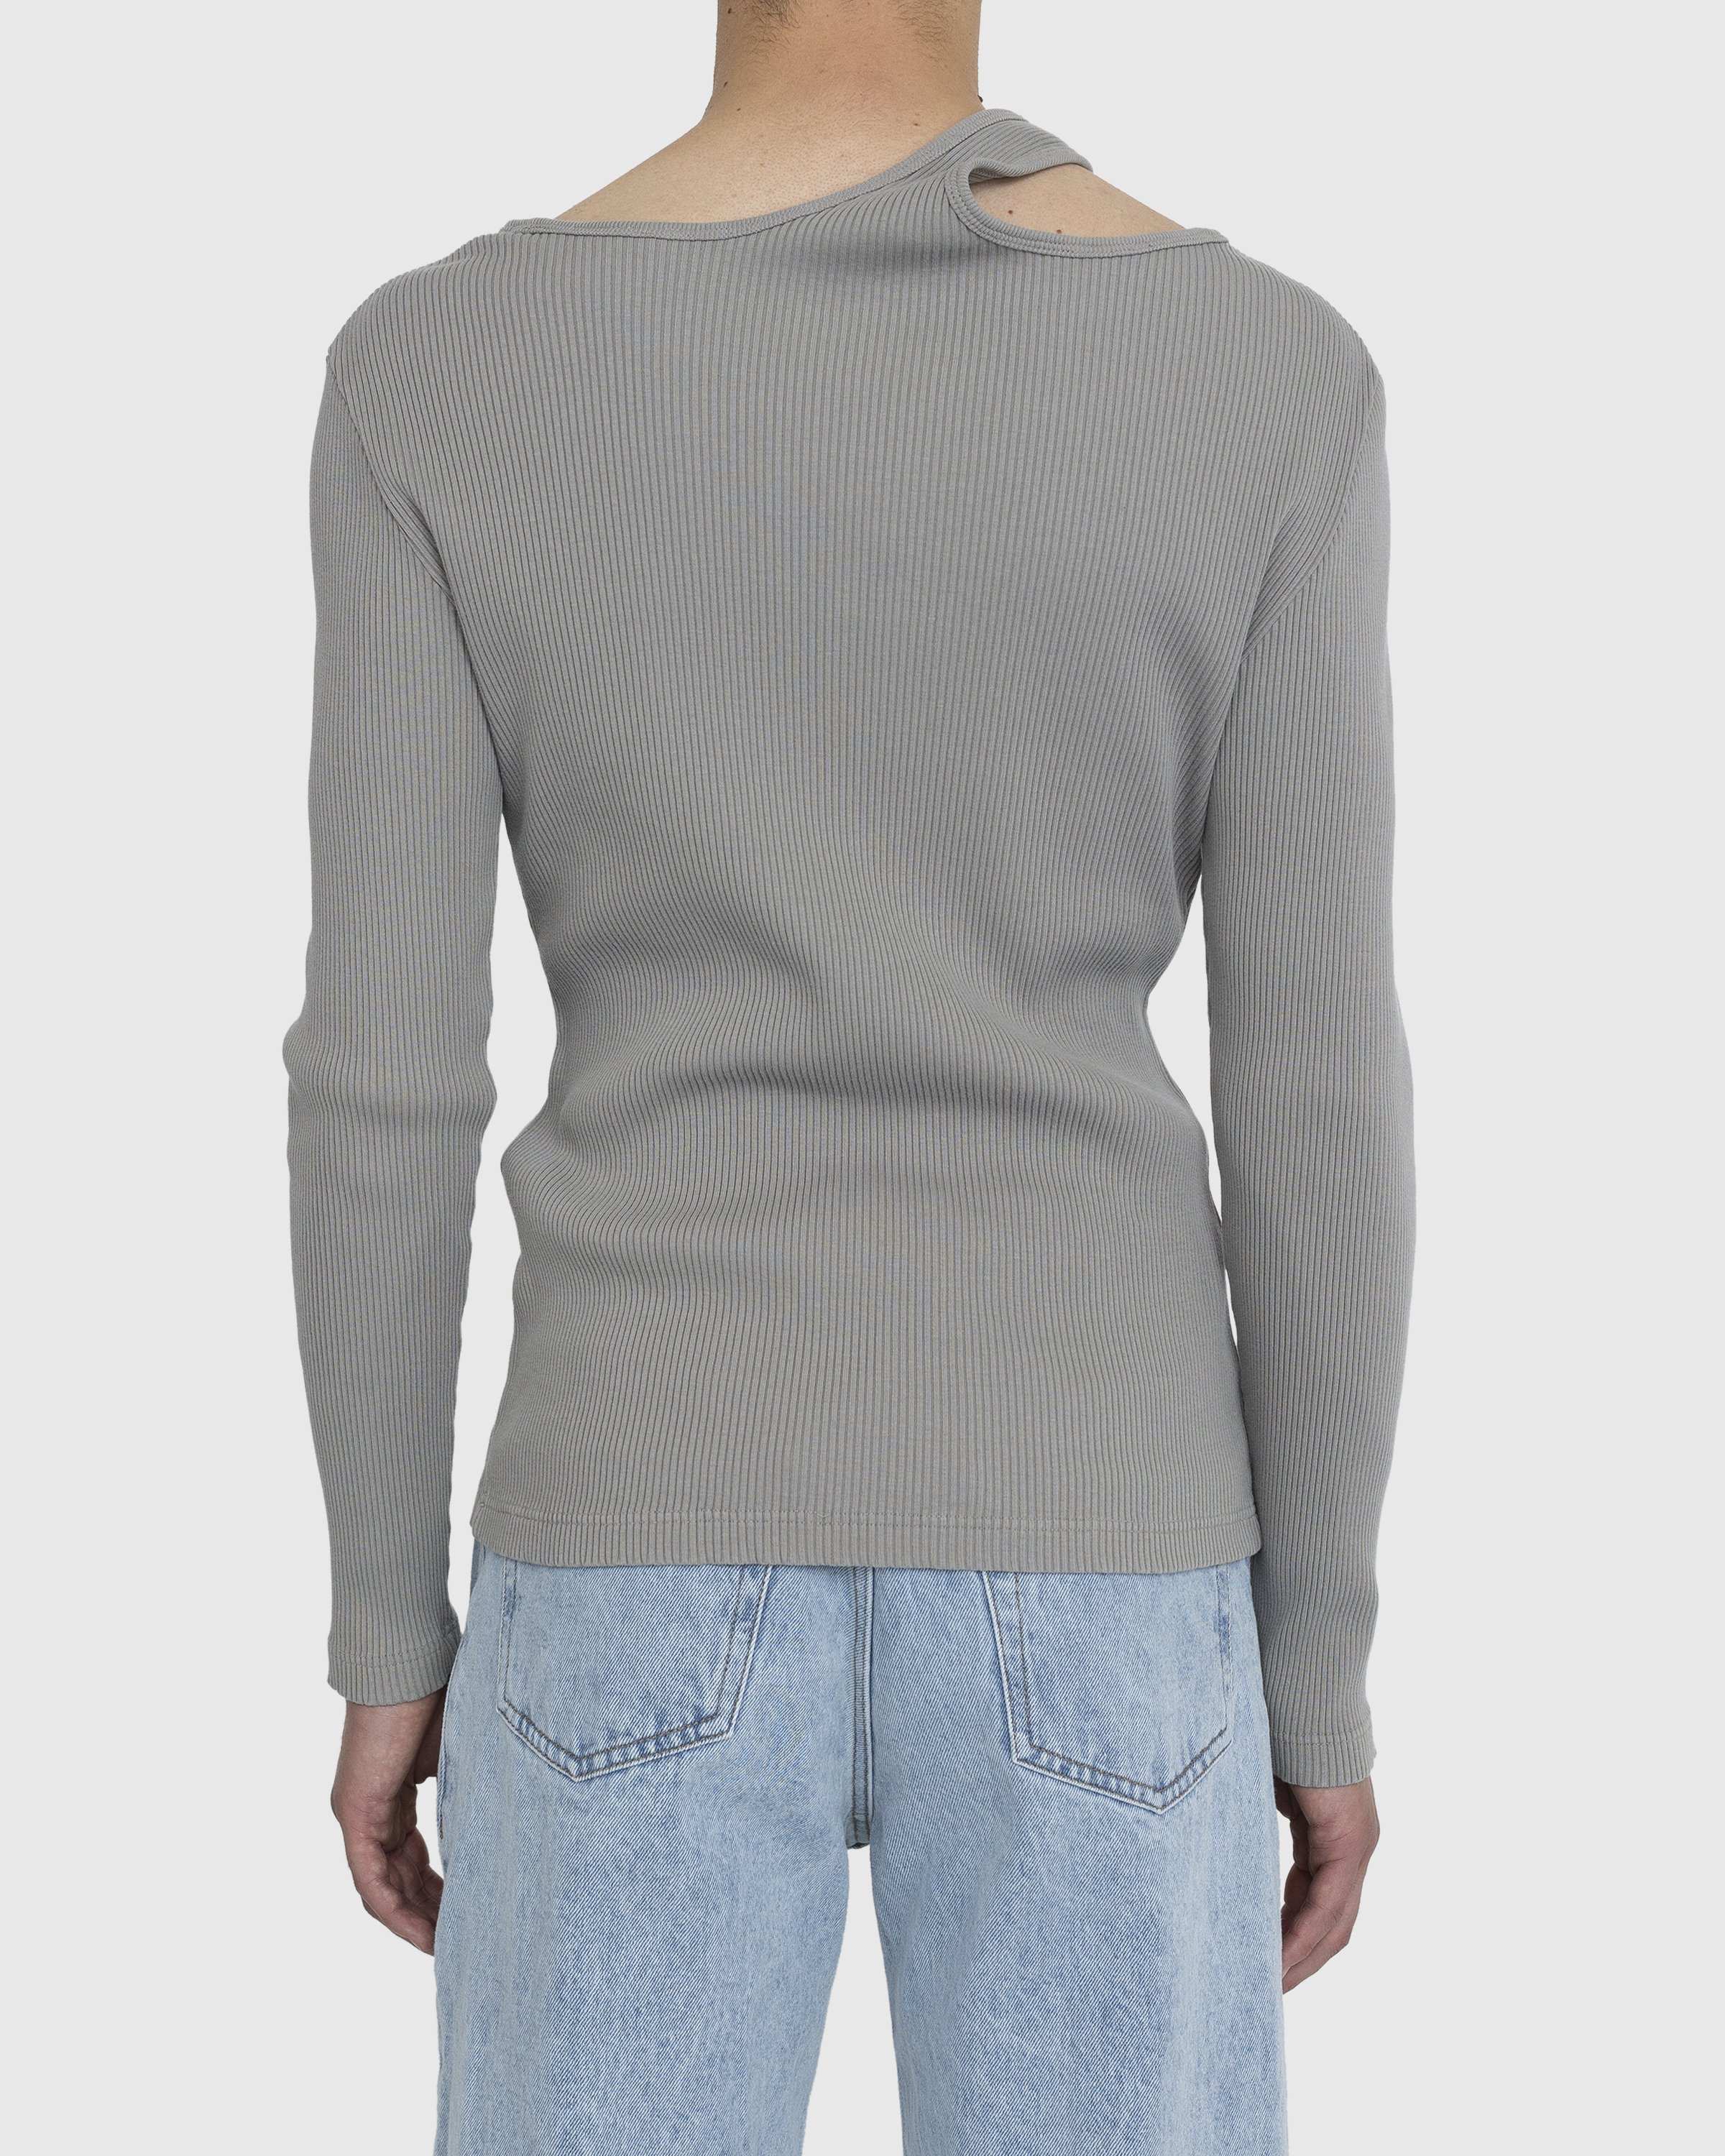 Y/Project - Classic Double Collar T-Shirt Taupe - Clothing - Grey - Image 4